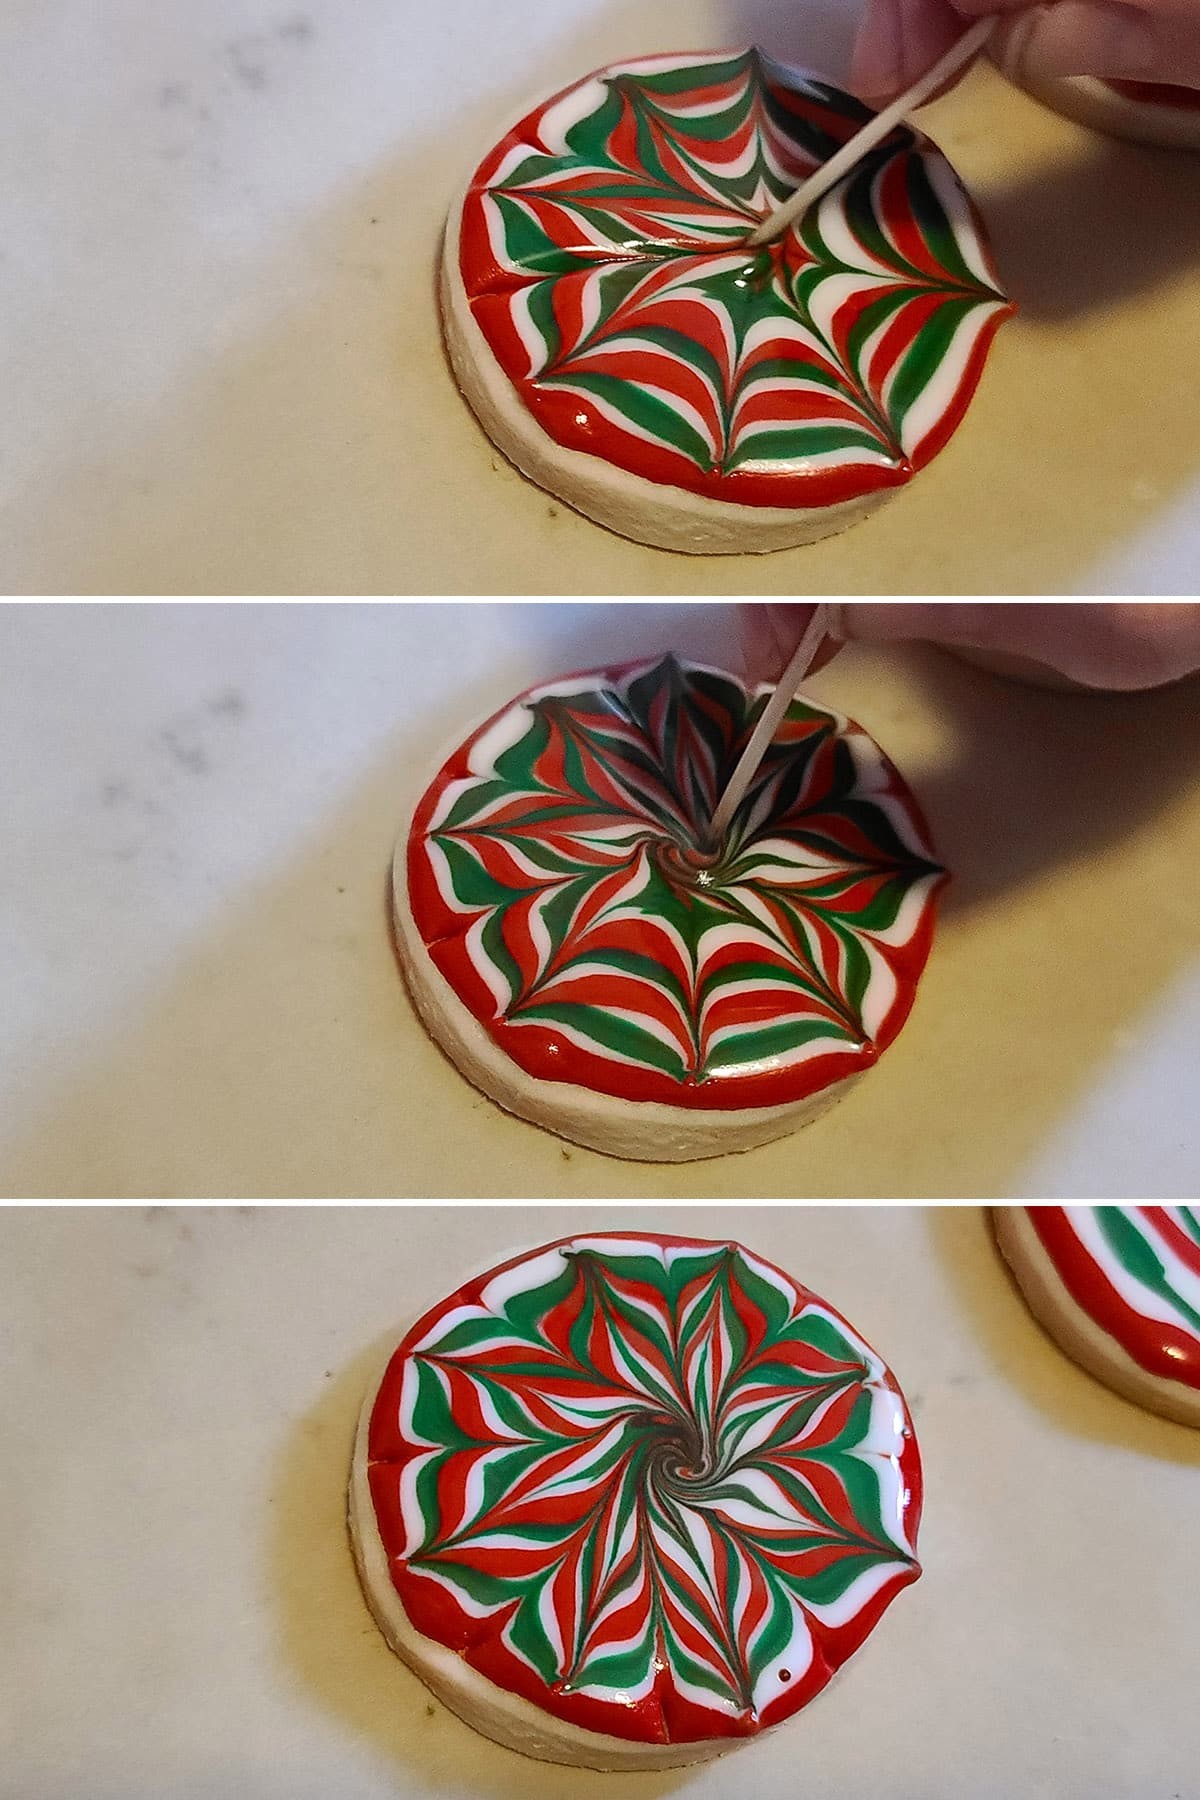 A 3 part image showing the outer edge of a starburst design cooking being dragged towards the center between each peak, forming a wavy starburst design.